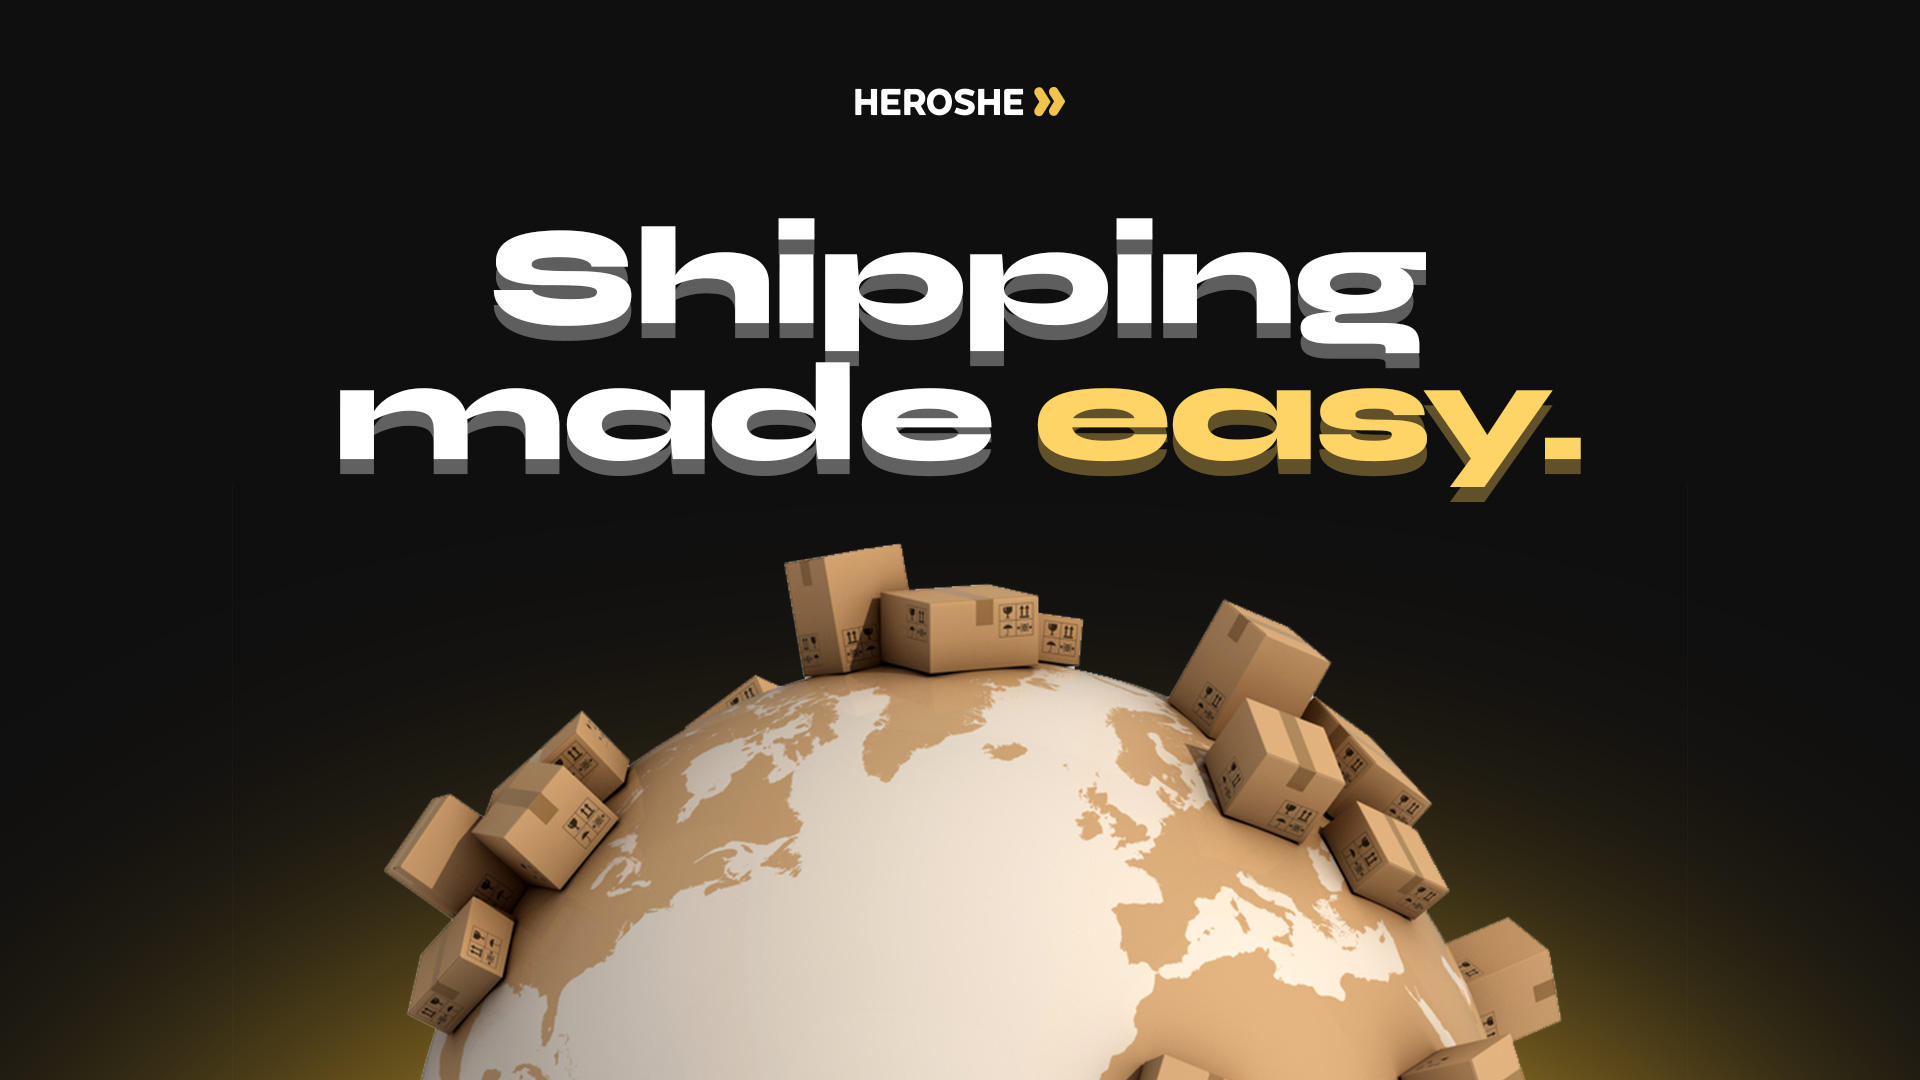 Shipping made easy with Heroshe